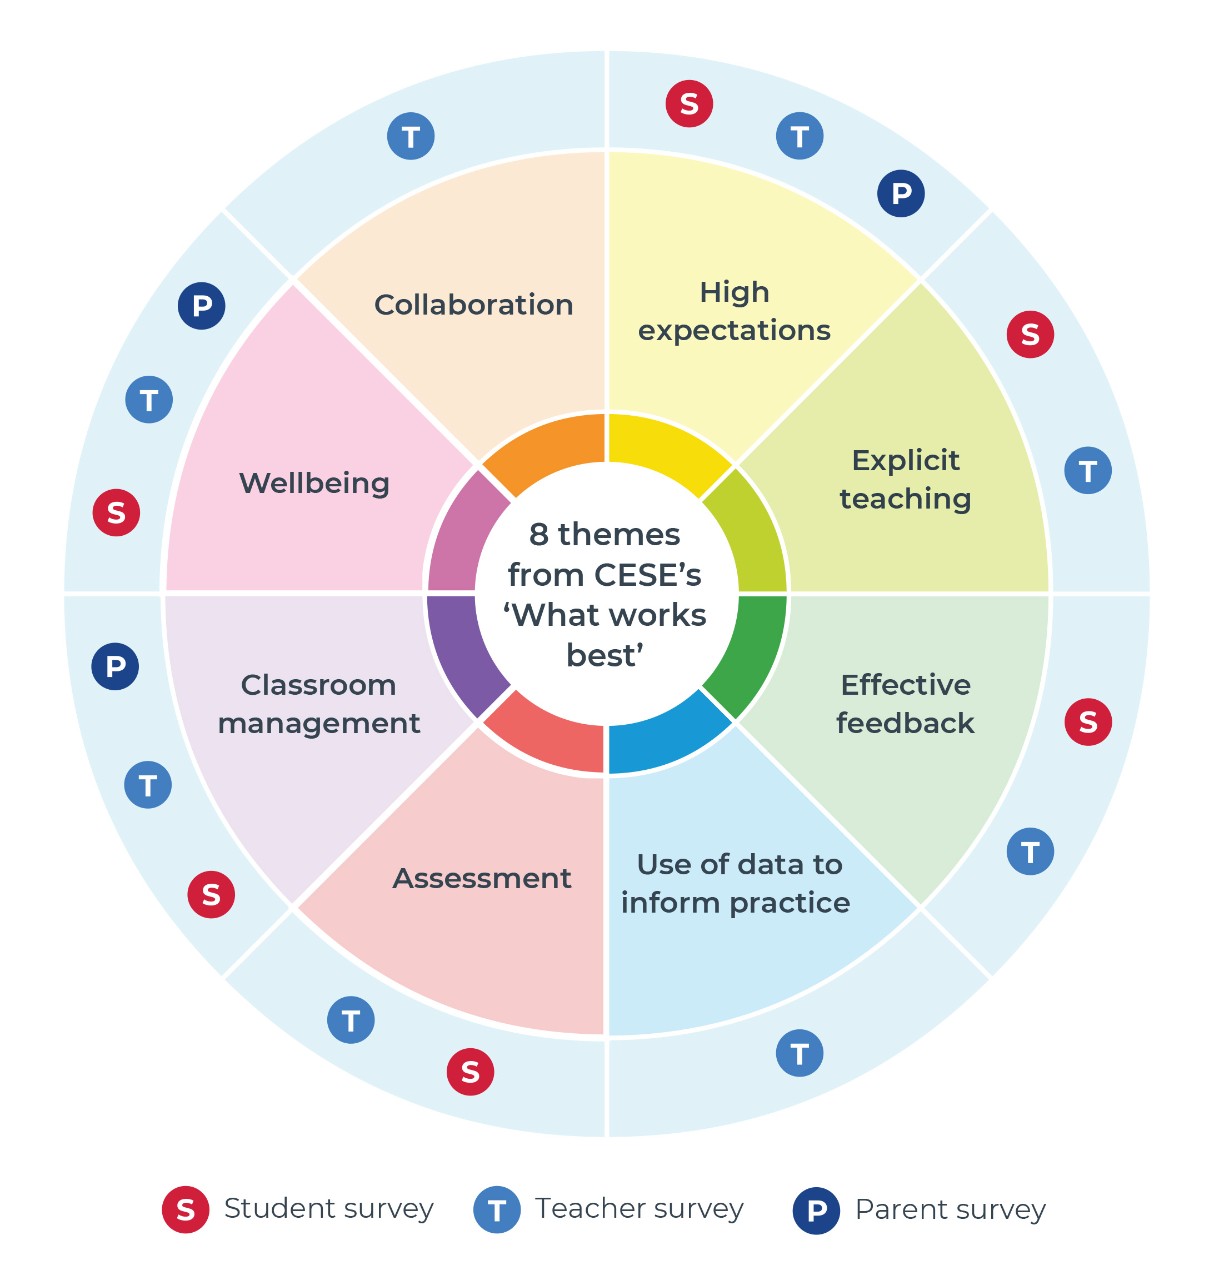 The teacher survey relates to all 8 what works best themes. The student survey relates to high expectations, explicit teaching, effective feedback, assessment, classroom management and wellbeing. The parent survey relates to wellbeing, classroom management and high expectations.